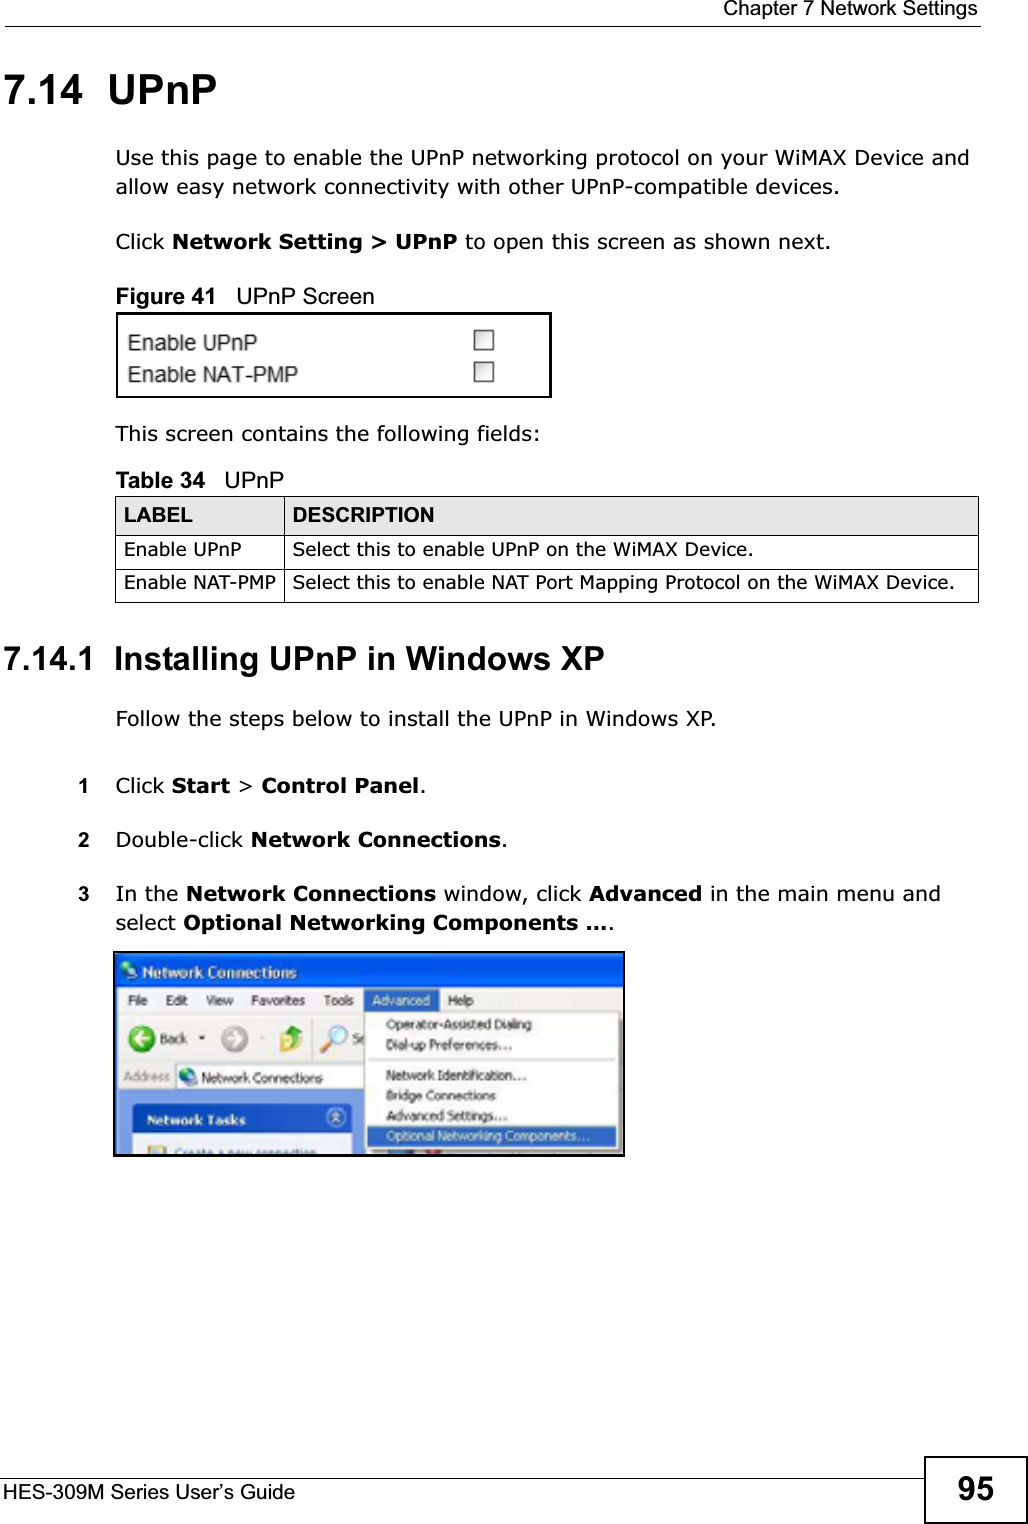  Chapter 7 Network SettingsHES-309M Series User’s Guide 957.14  UPnPUse this page to enable the UPnP networking protocol on your WiMAX Device and allow easy network connectivity with other UPnP-compatible devices.Click Network Setting &gt; UPnP to open this screen as shown next.Figure 41   UPnP ScreenThis screen contains the following fields:7.14.1  Installing UPnP in Windows XPFollow the steps below to install the UPnP in Windows XP.1Click Start &gt; Control Panel.2Double-click Network Connections.3In the Network Connections window, click Advanced in the main menu and select Optional Networking Components ….Table 34   UPnPLABEL DESCRIPTIONEnable UPnP Select this to enable UPnP on the WiMAX Device.Enable NAT-PMP Select this to enable NAT Port Mapping Protocol on the WiMAX Device.